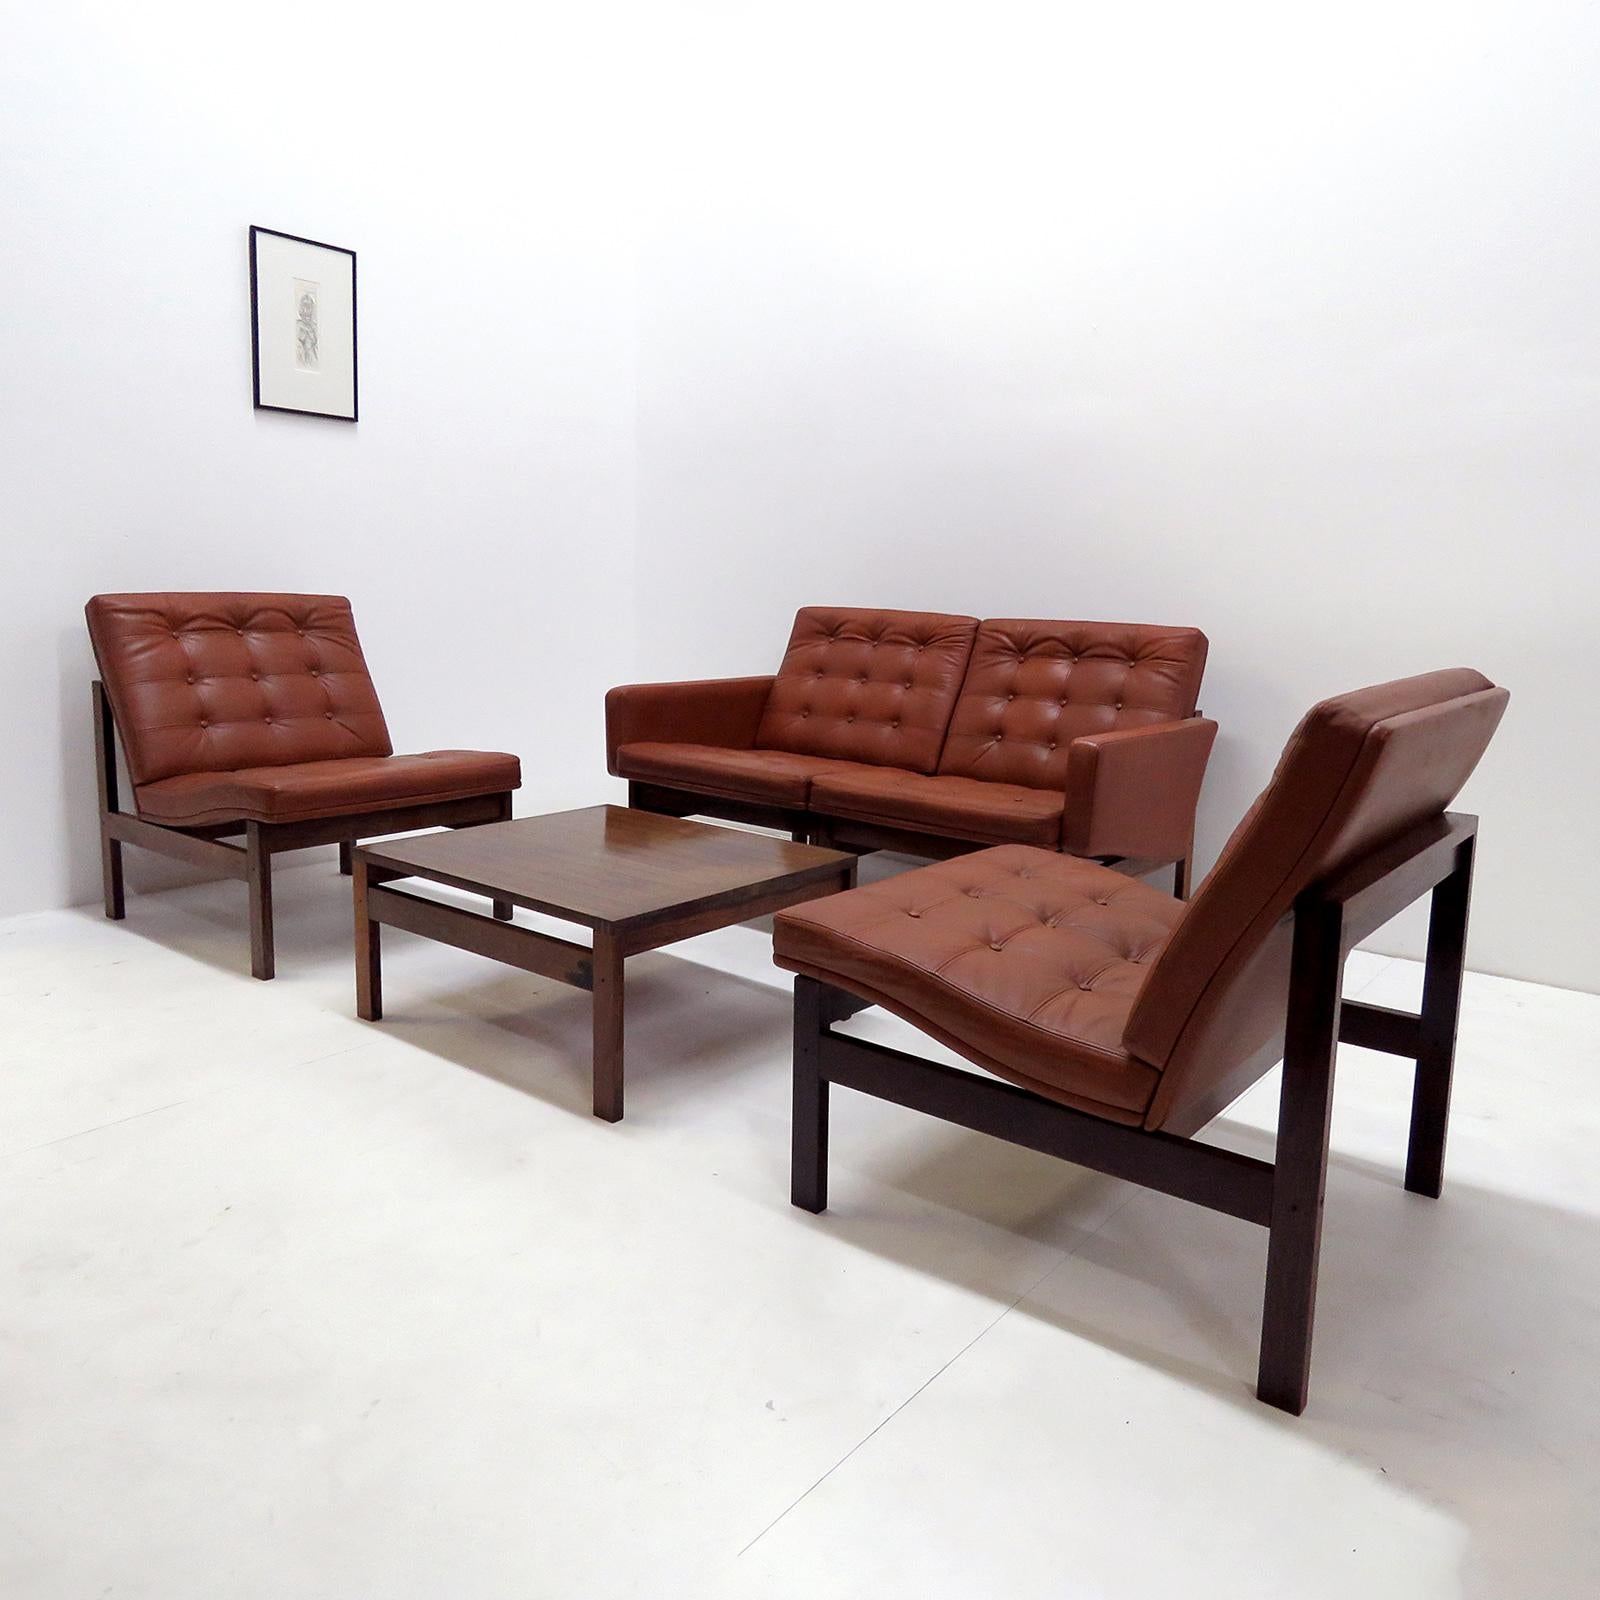 Ole Gjerlov-Knudsen & Torben Lind 'Moduline' Leather Seating Set, 1962 In Good Condition For Sale In Los Angeles, CA